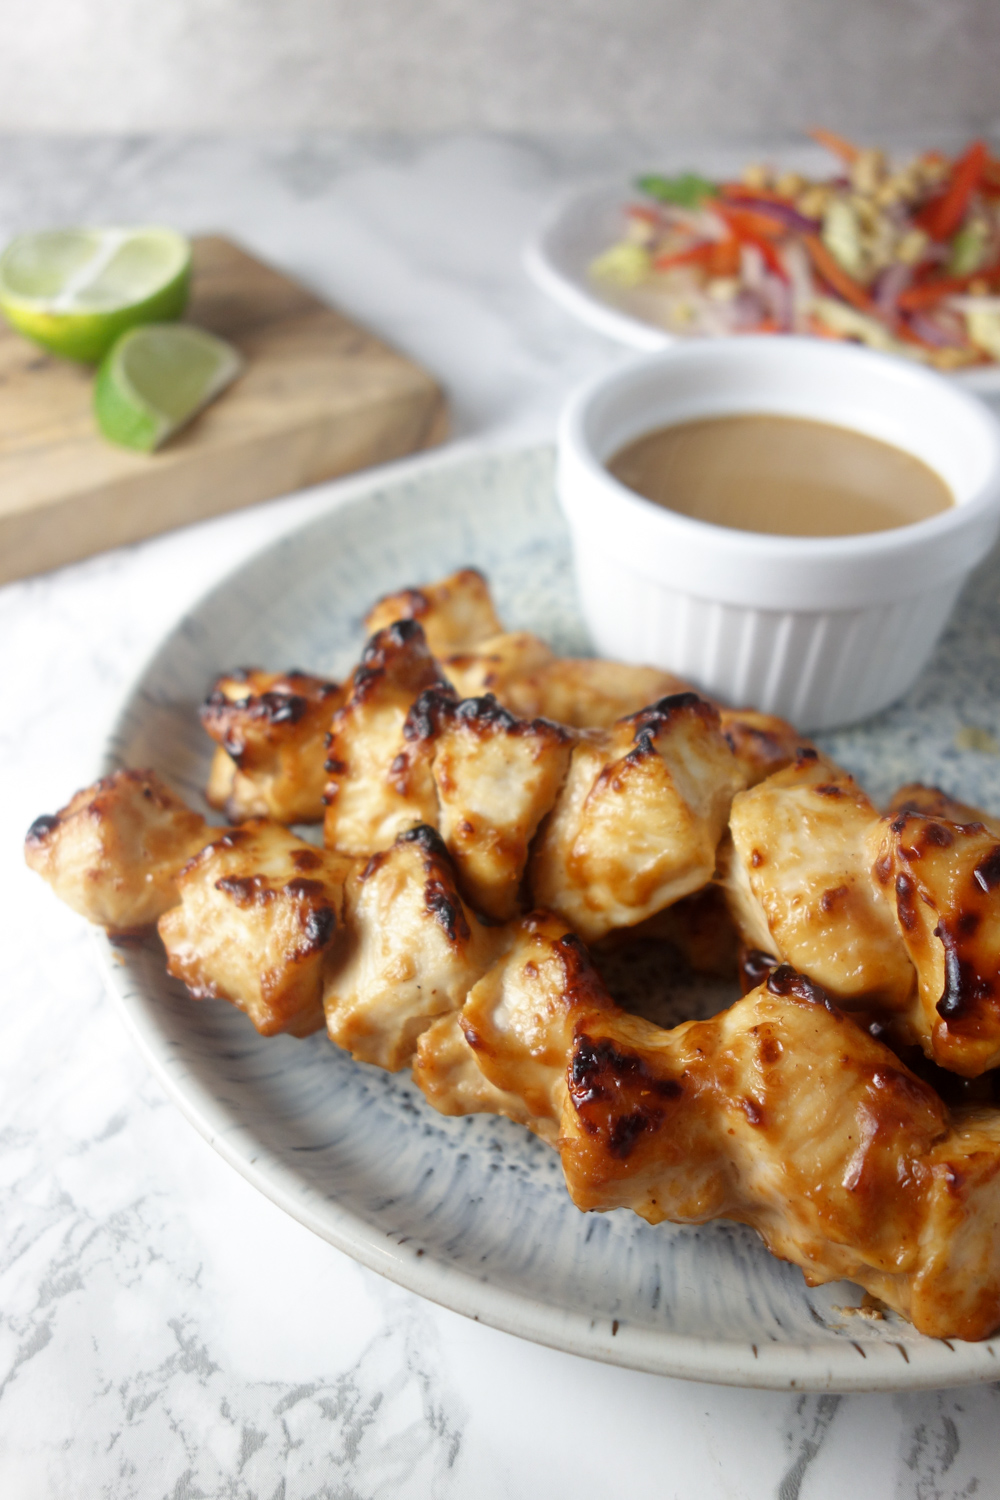 A quick & easy recipe for chicken satay skewers with a creamy, nutty peanut dipping sauce. SO tasty!